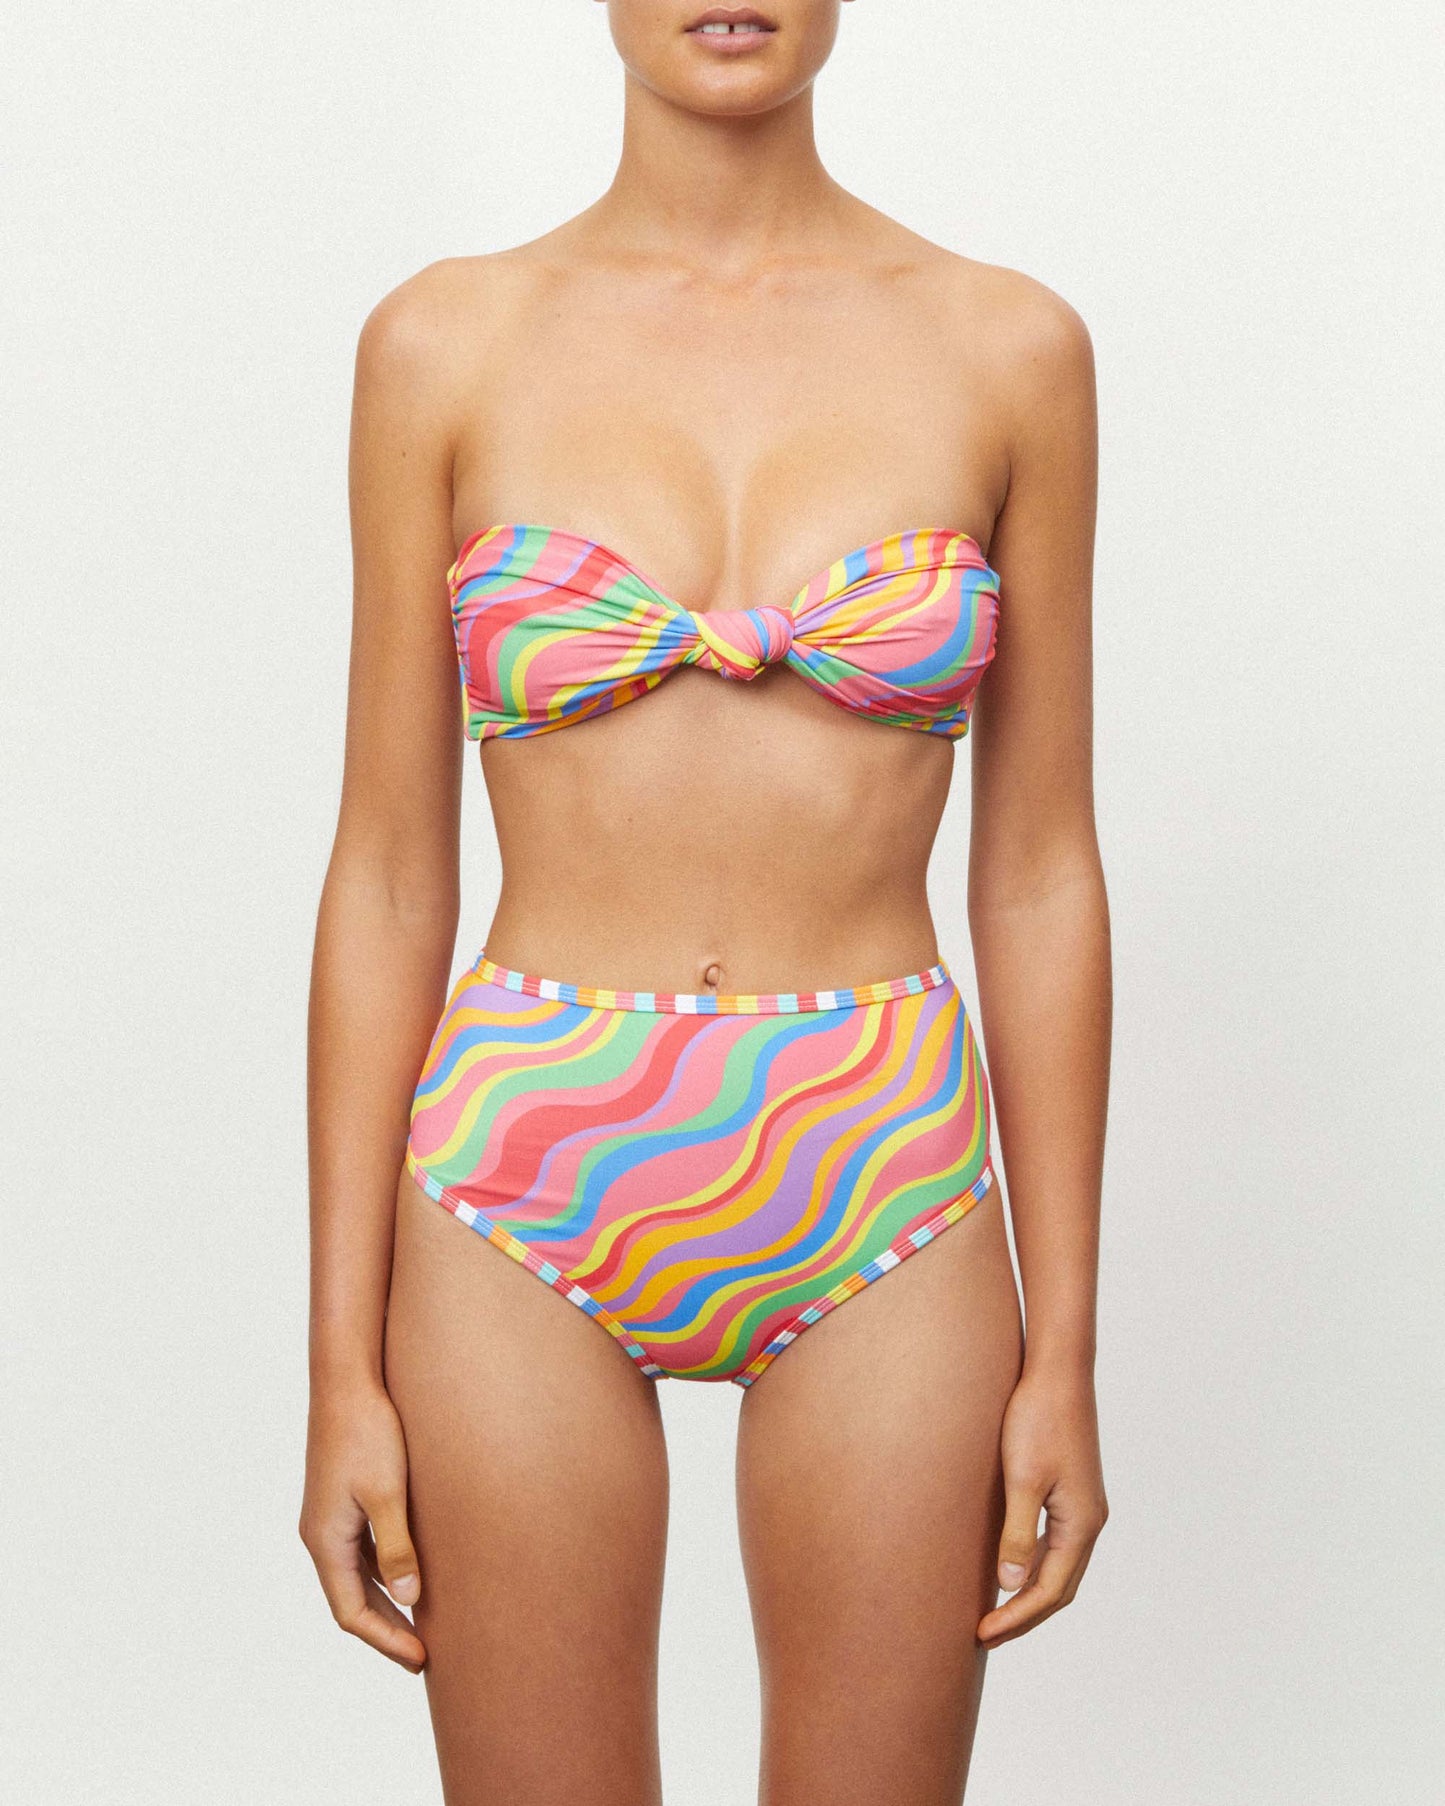 On body front of THE KNOT ECO BANDEAU - RAINBOW